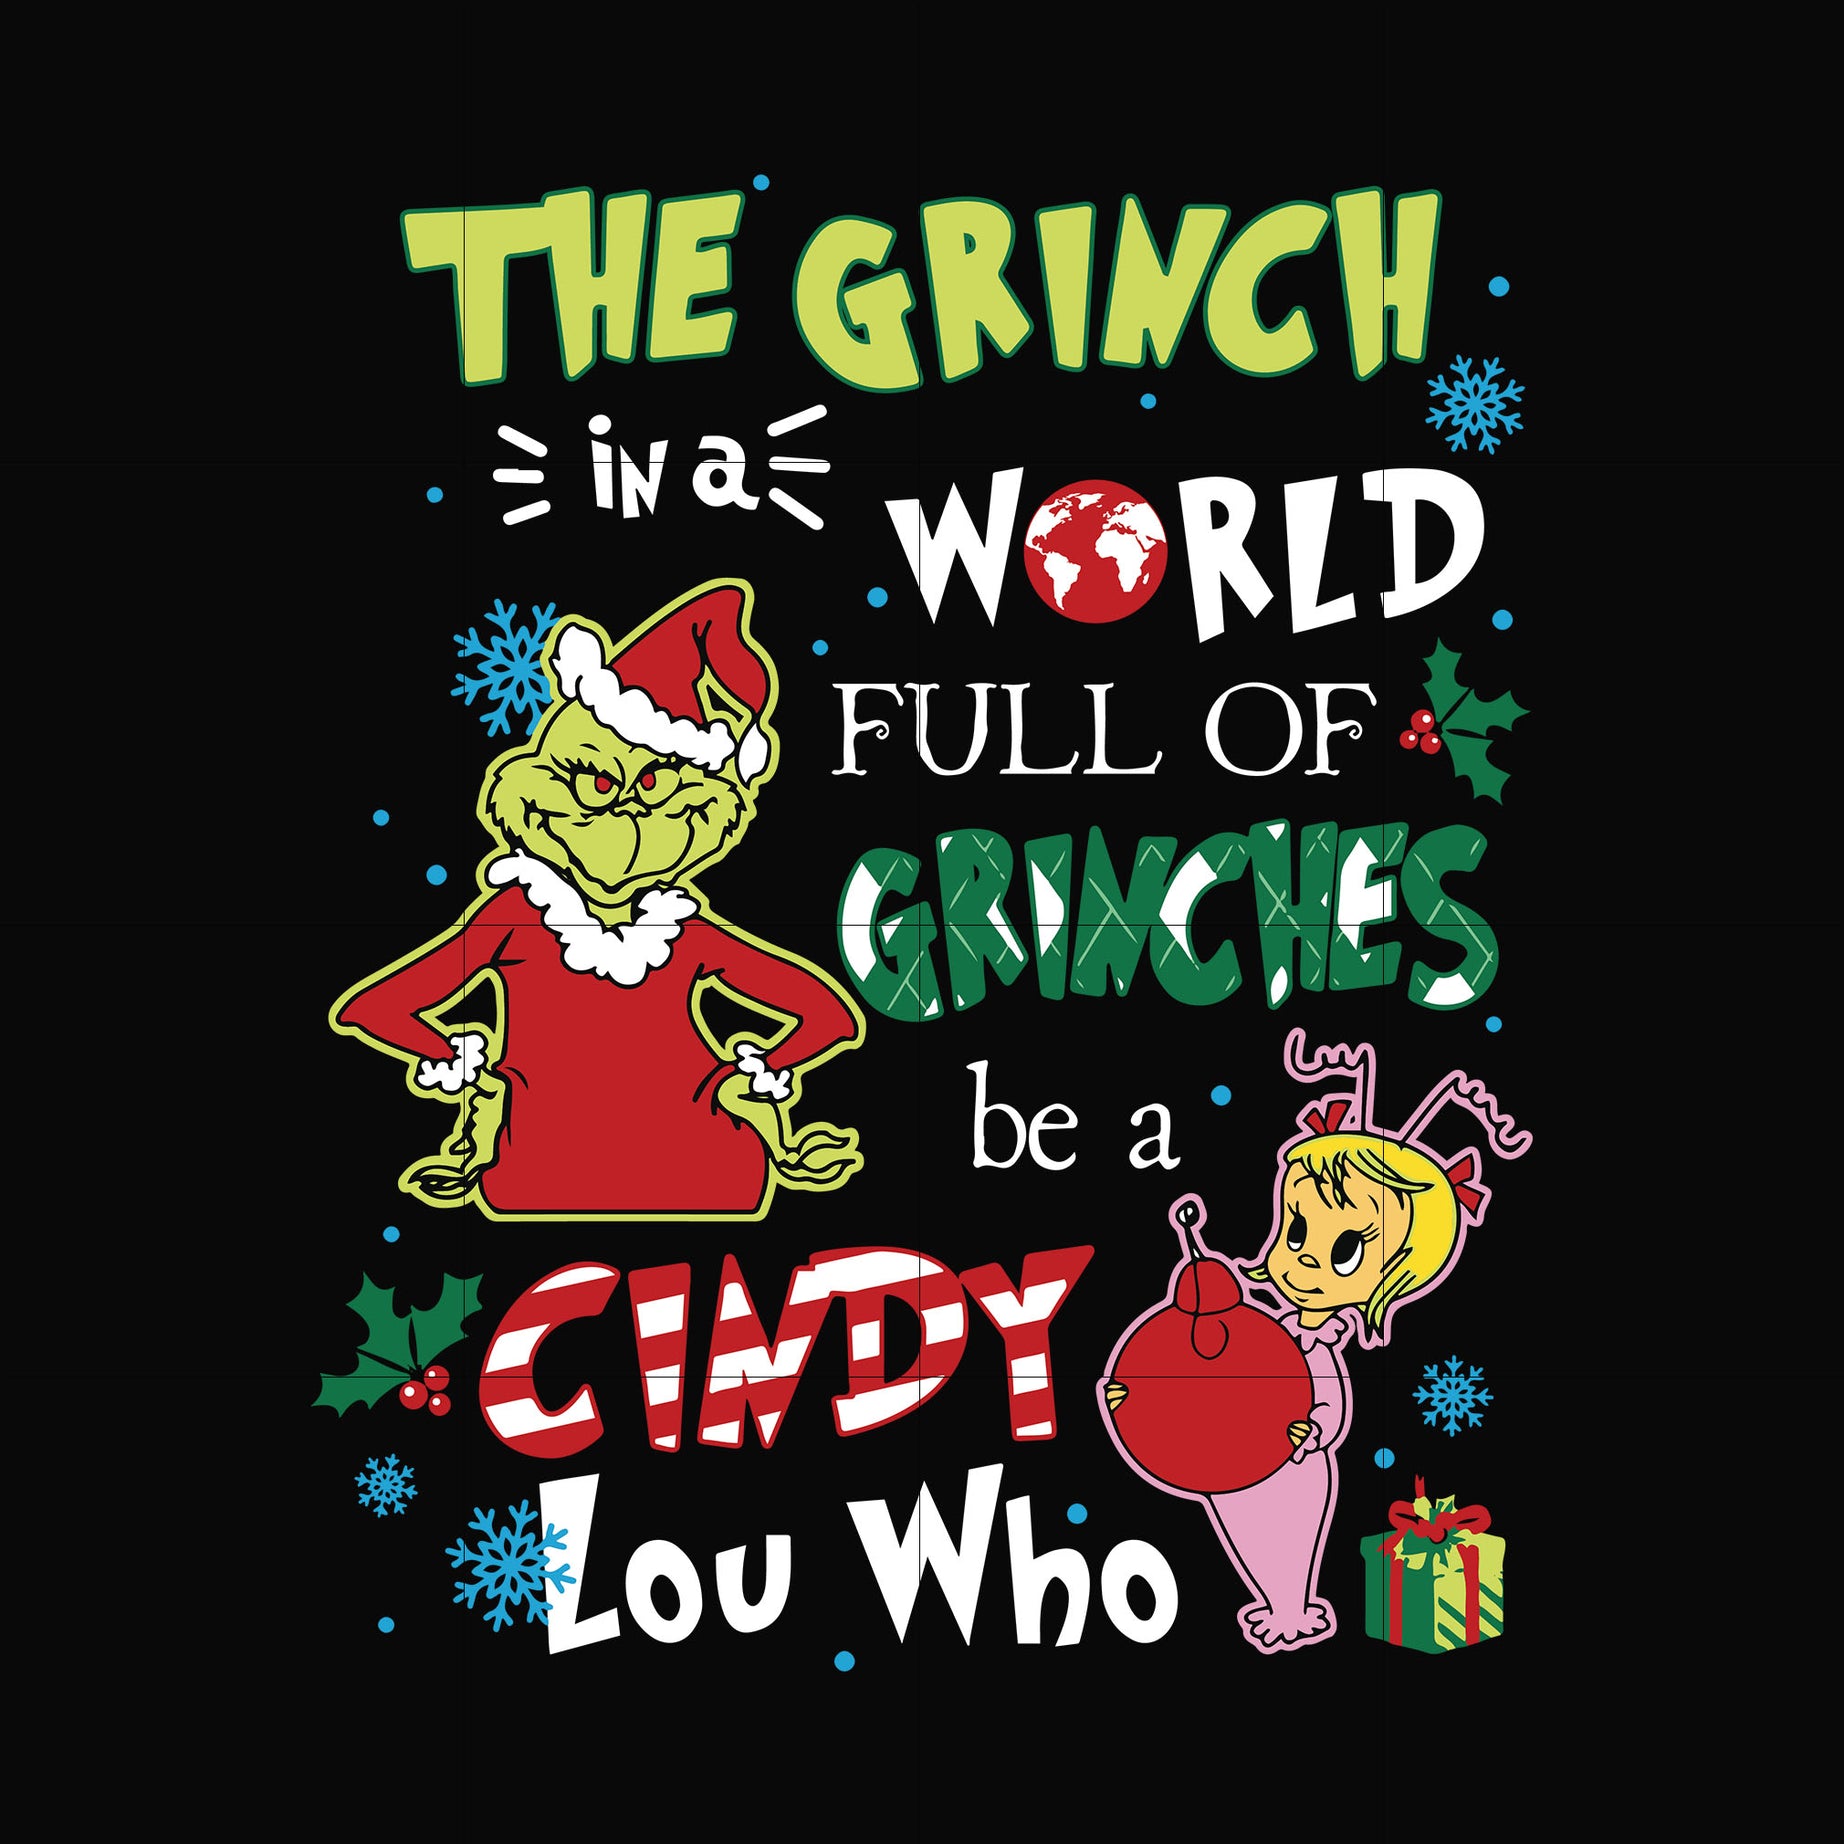 The grinch in a world full of grinches be a cindy lou who svg, png, dxf, eps digital file NCRM0139